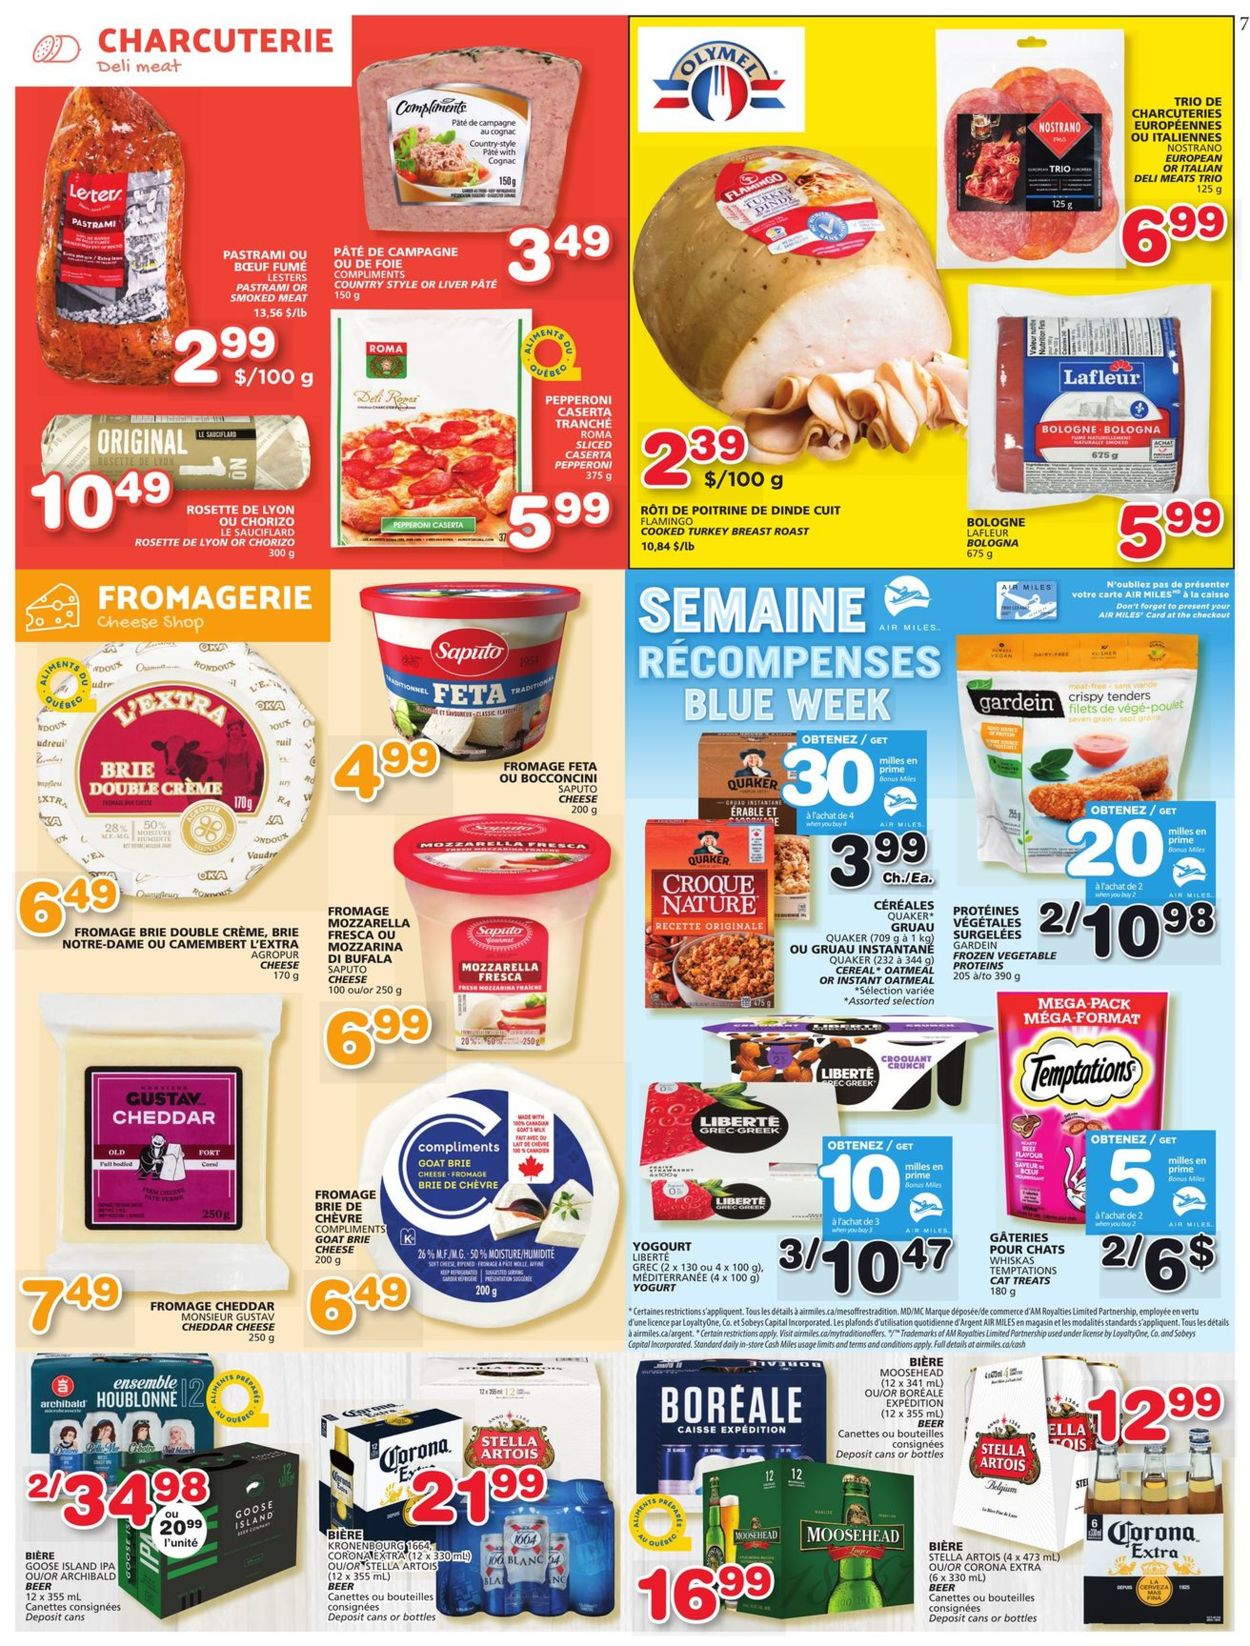 IGA Flyer from 08/25/2022